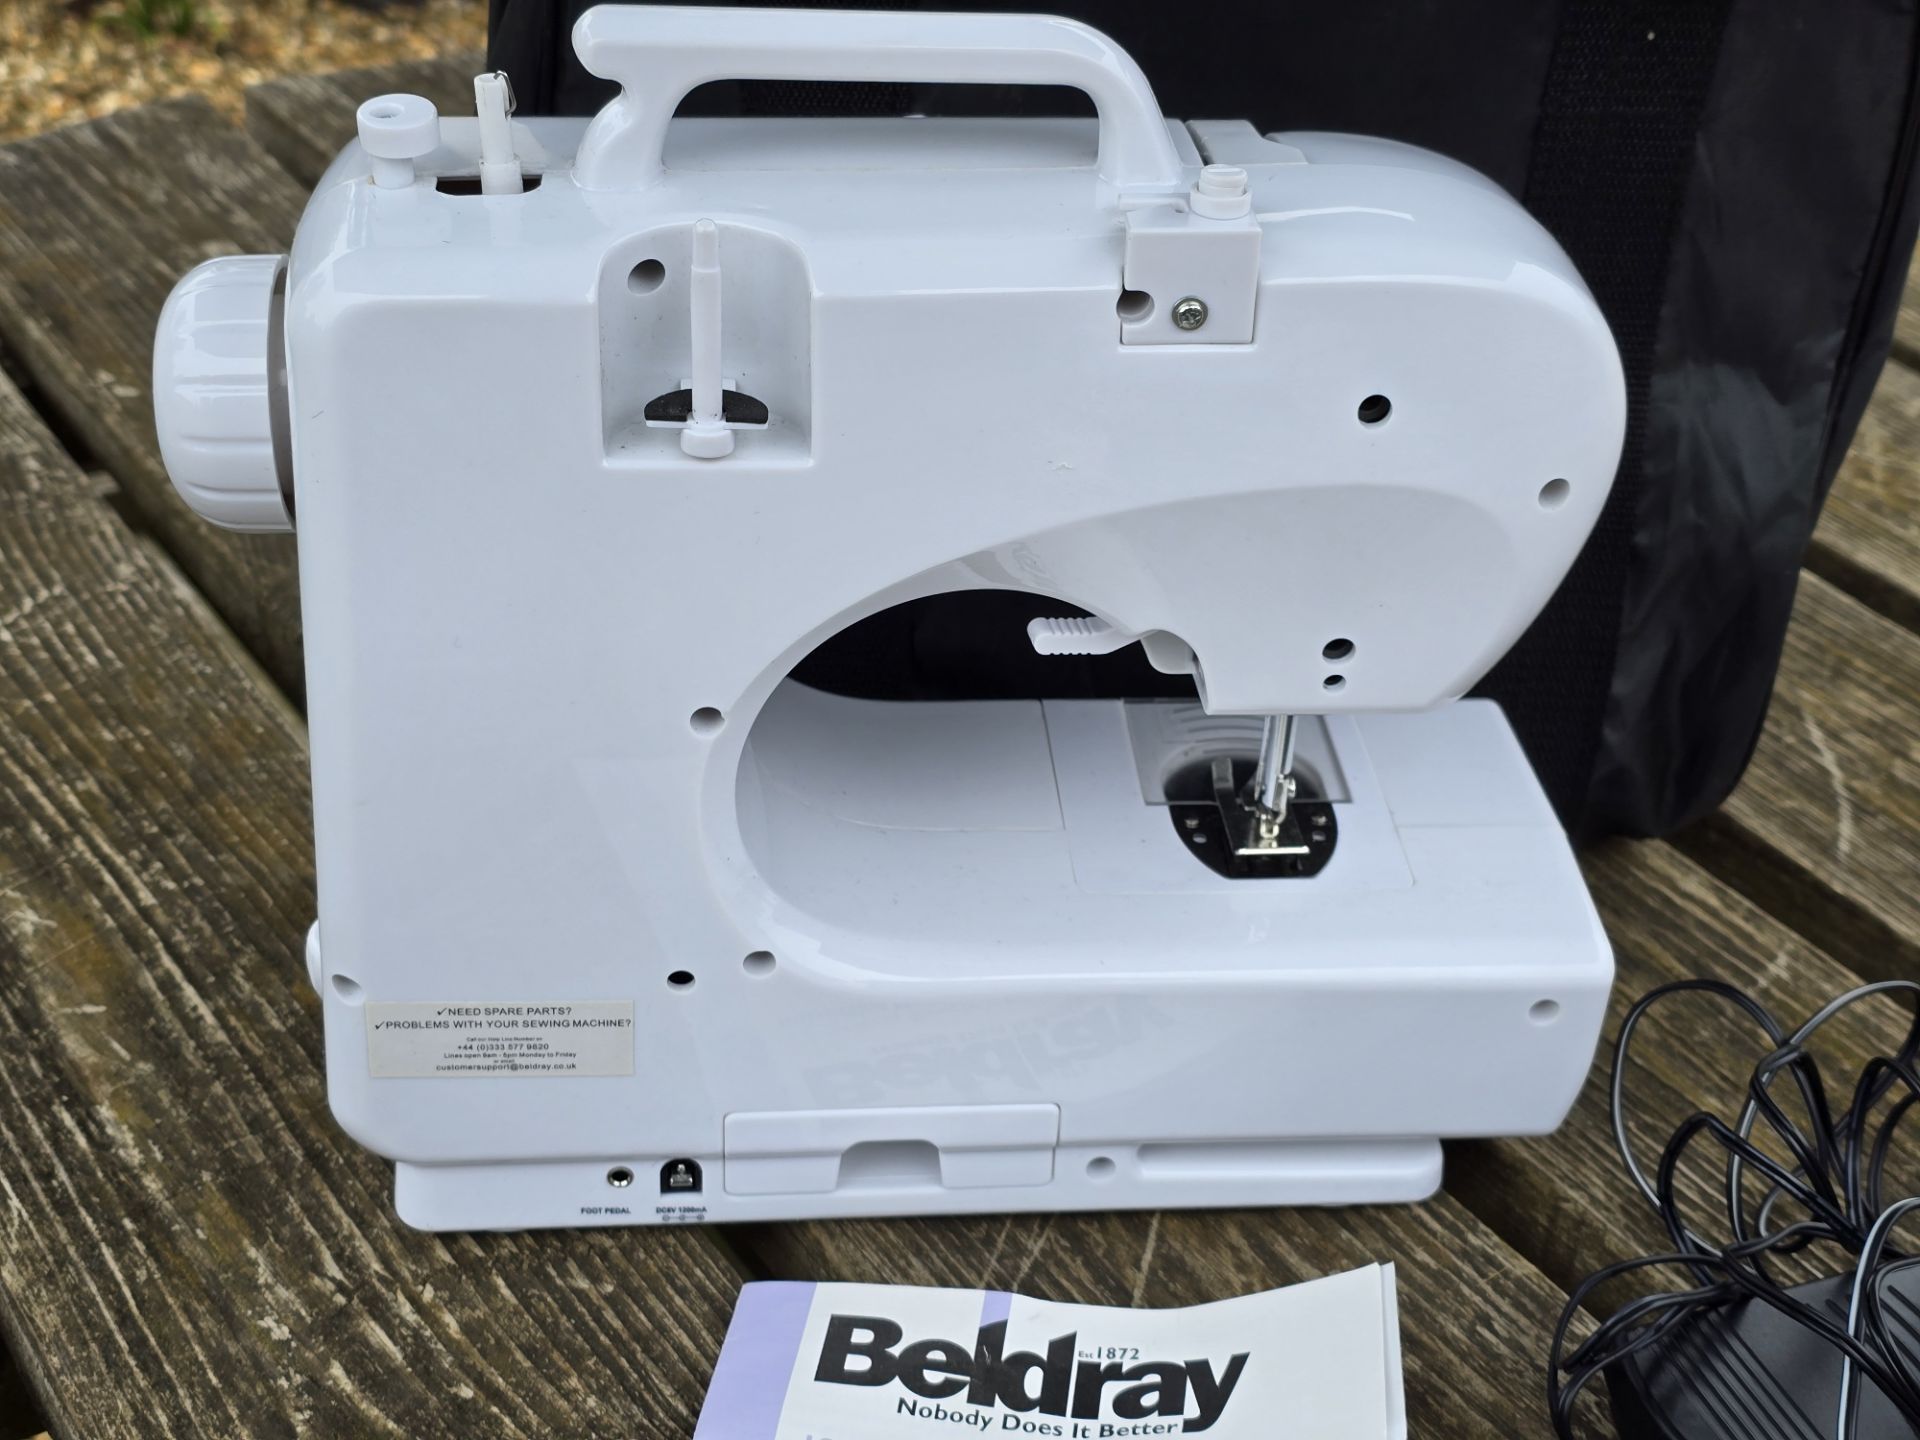 Beldray 12 Stitch portable sewing machine with bag and extras - tested - Image 5 of 8